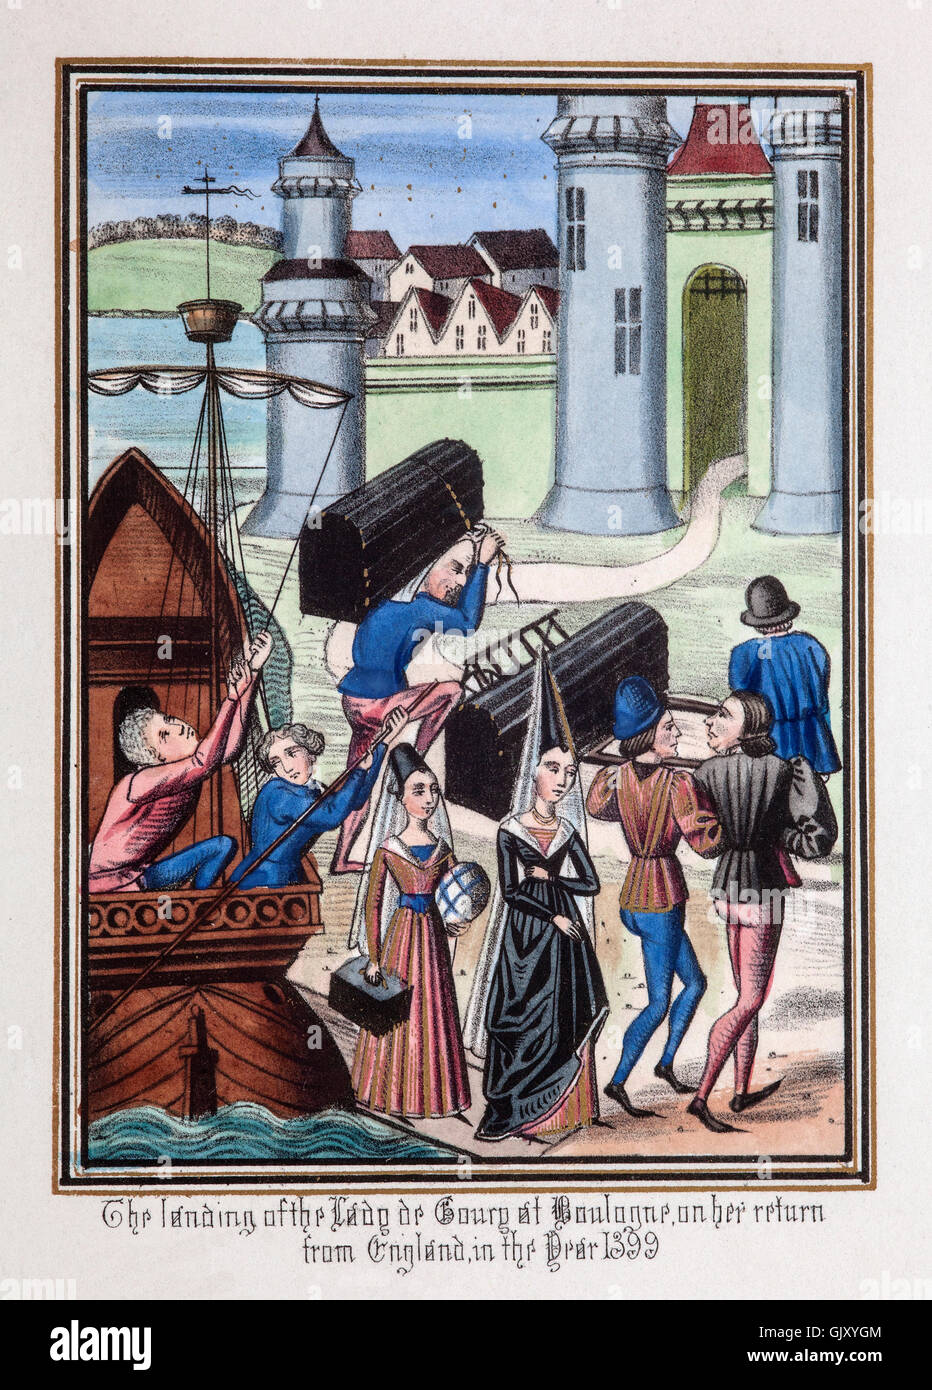 Lady de Courcy landing at Boulogne following her return from England in 1399. Stock Photo